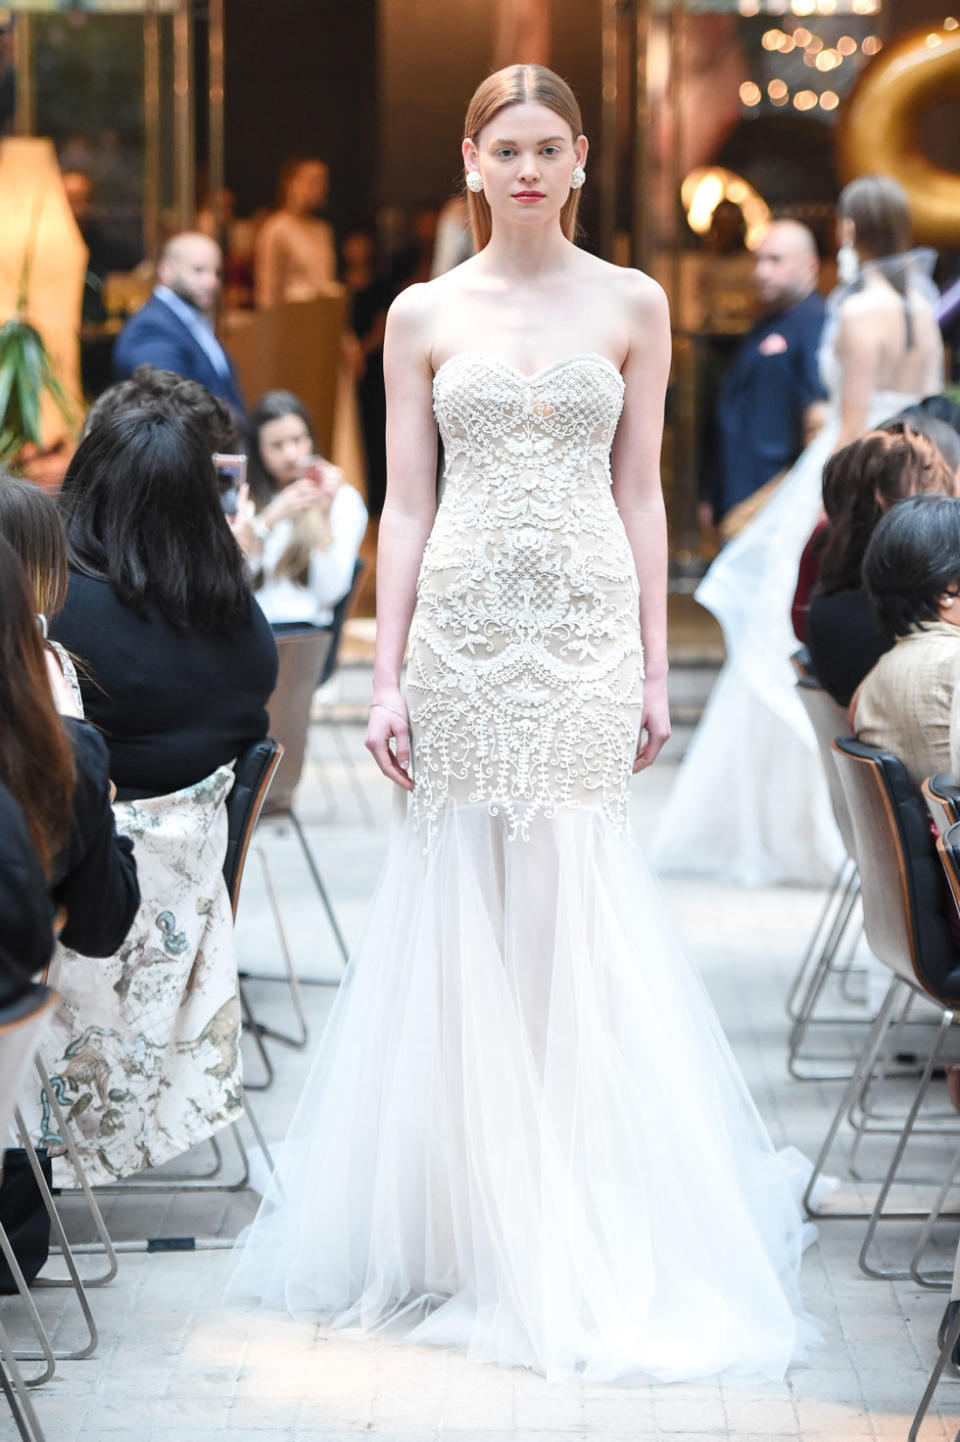 Strapless gown featuring a tulle skirt and intricate embroidery from the Sachin & Babi Spring 2018 bridal collection